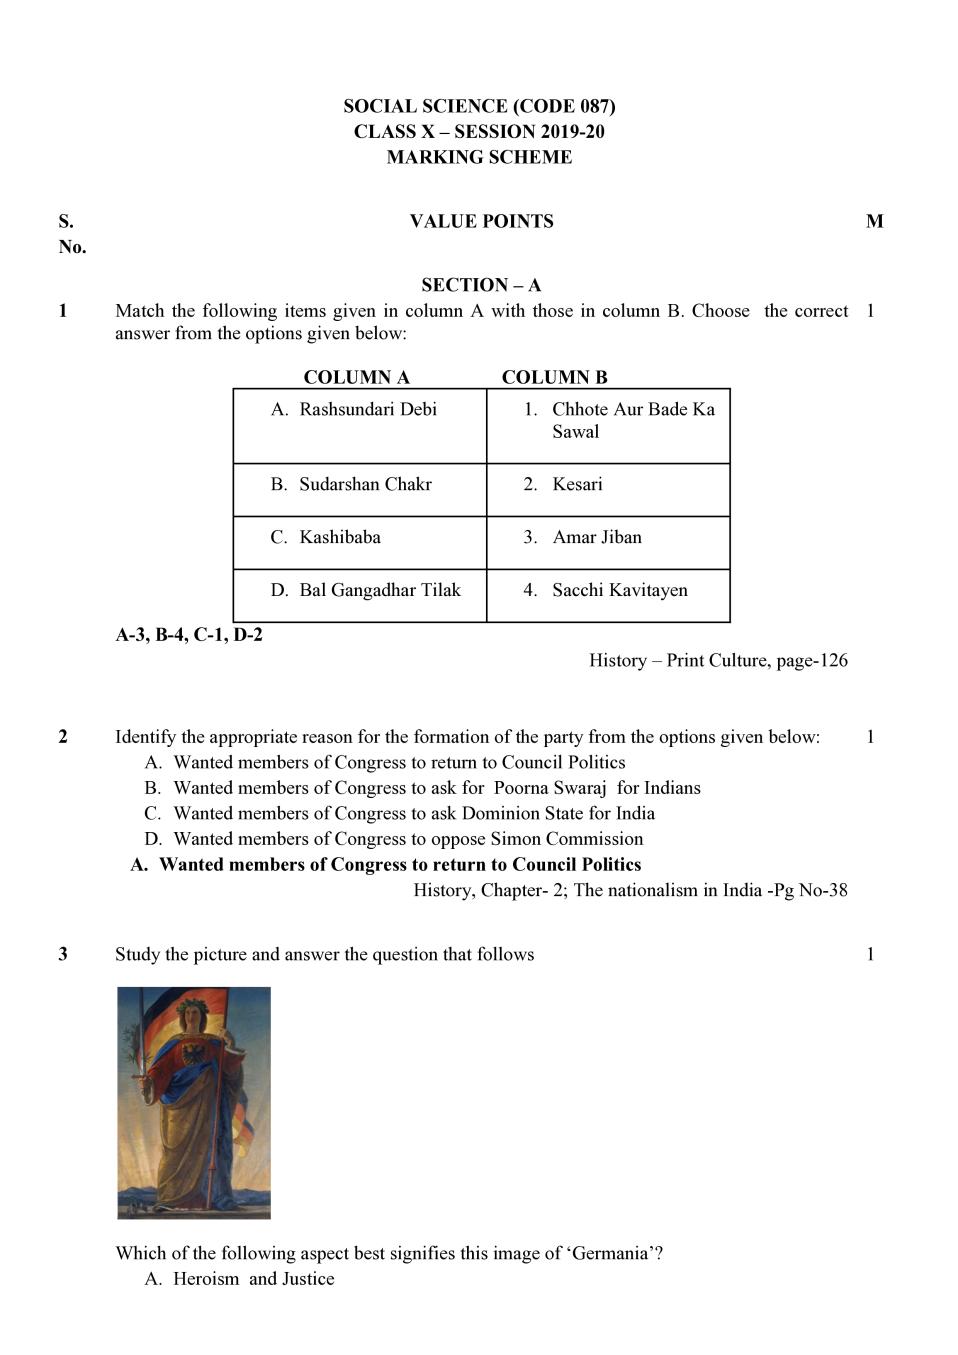 CBSE Class 10 Marking Scheme 2020 for Social Science - Page 1